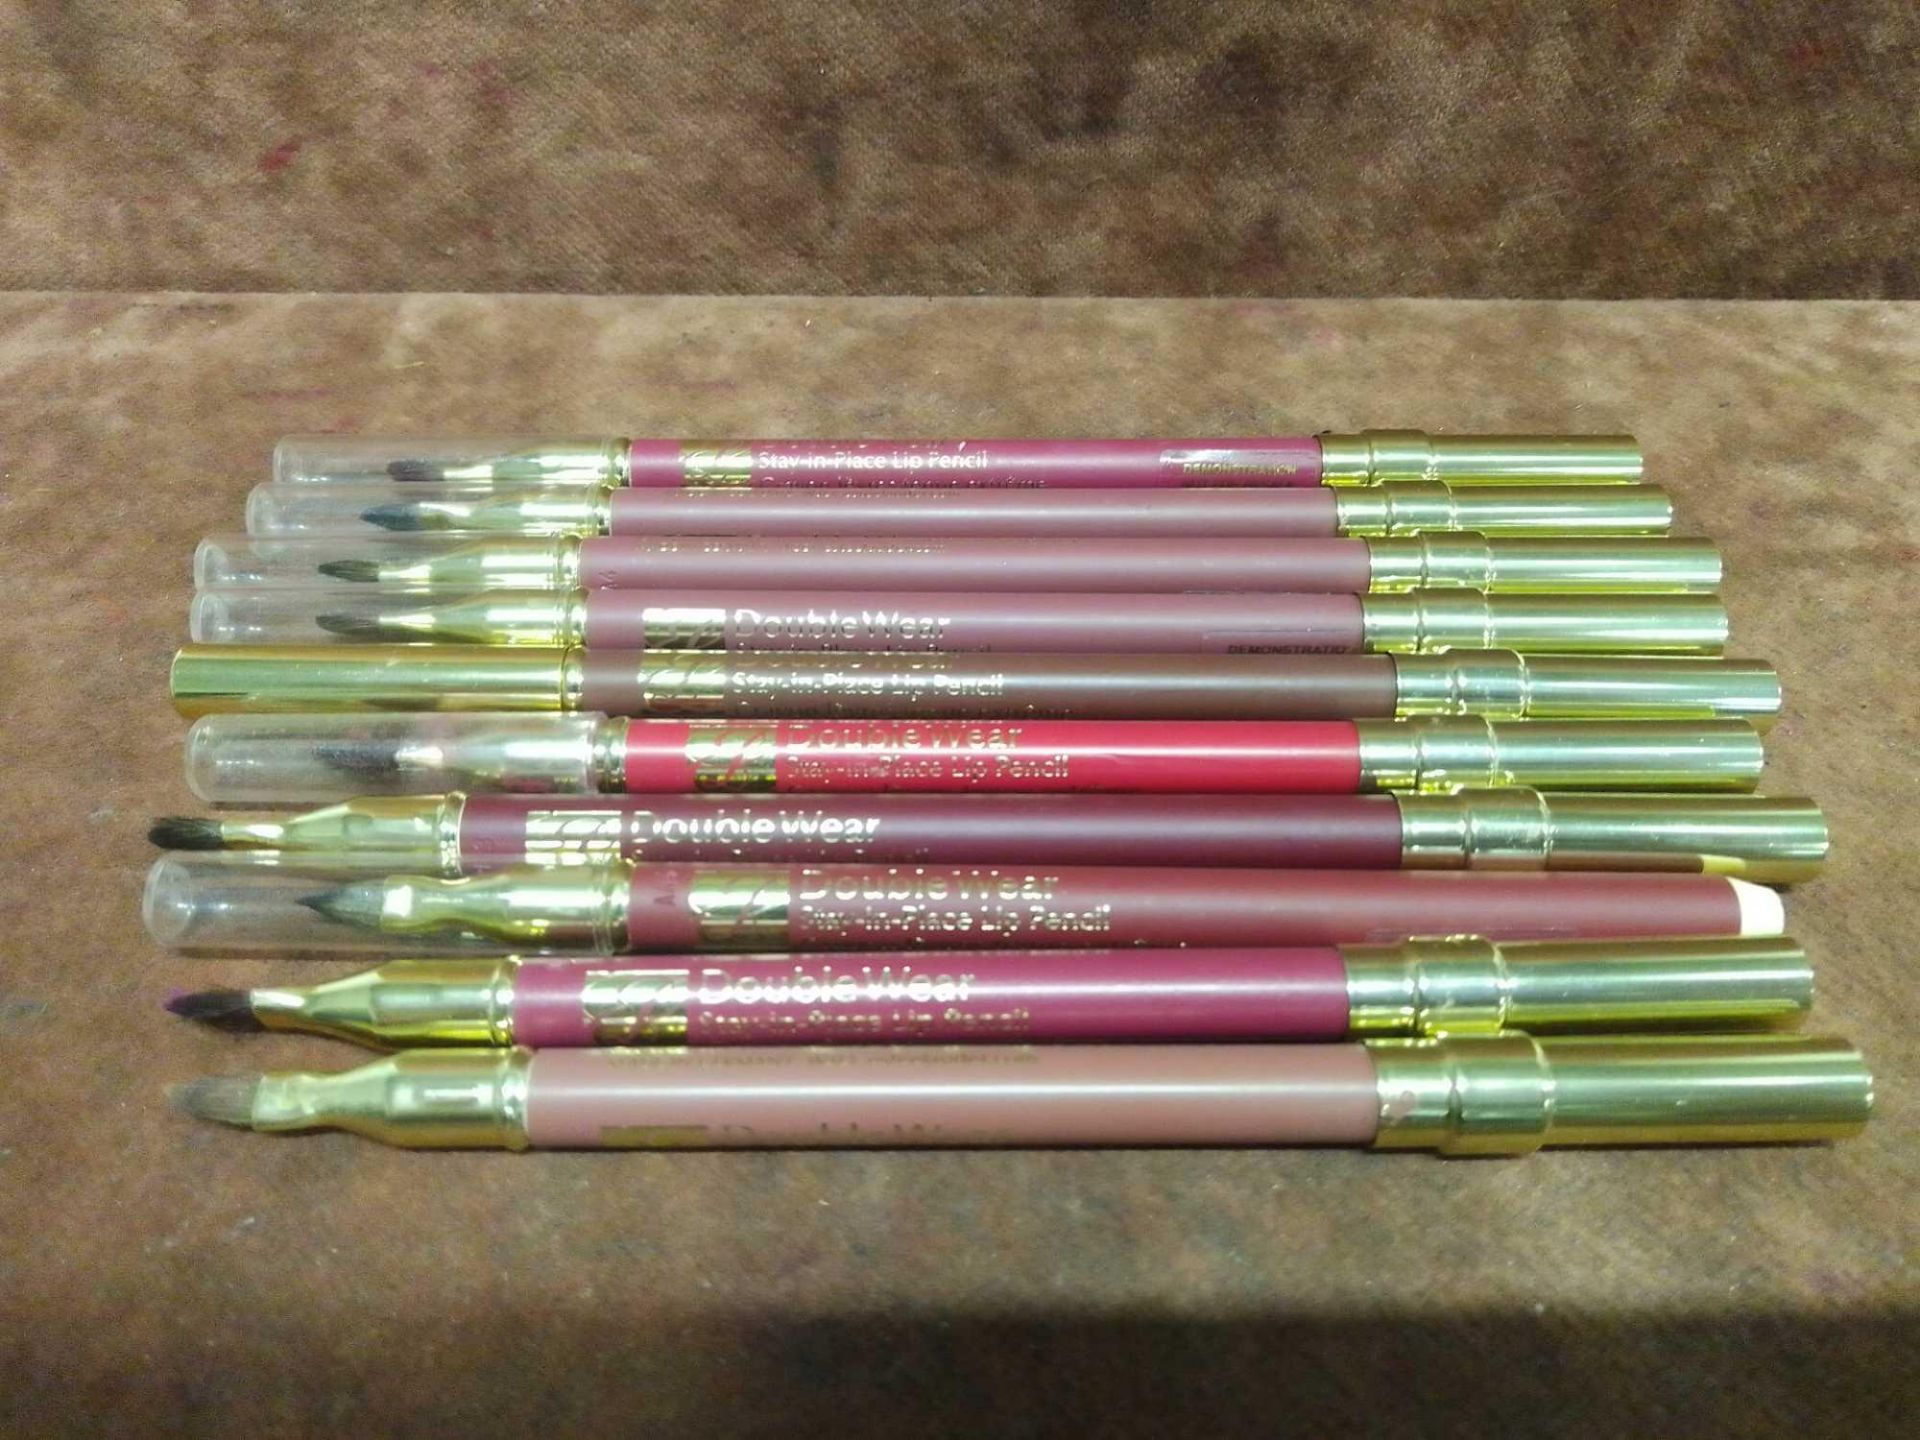 (Jb) RRP £200 Lot To Contain 10 Testers Of Assorted Premium Estee Lauder Makeup Pencils To Include L